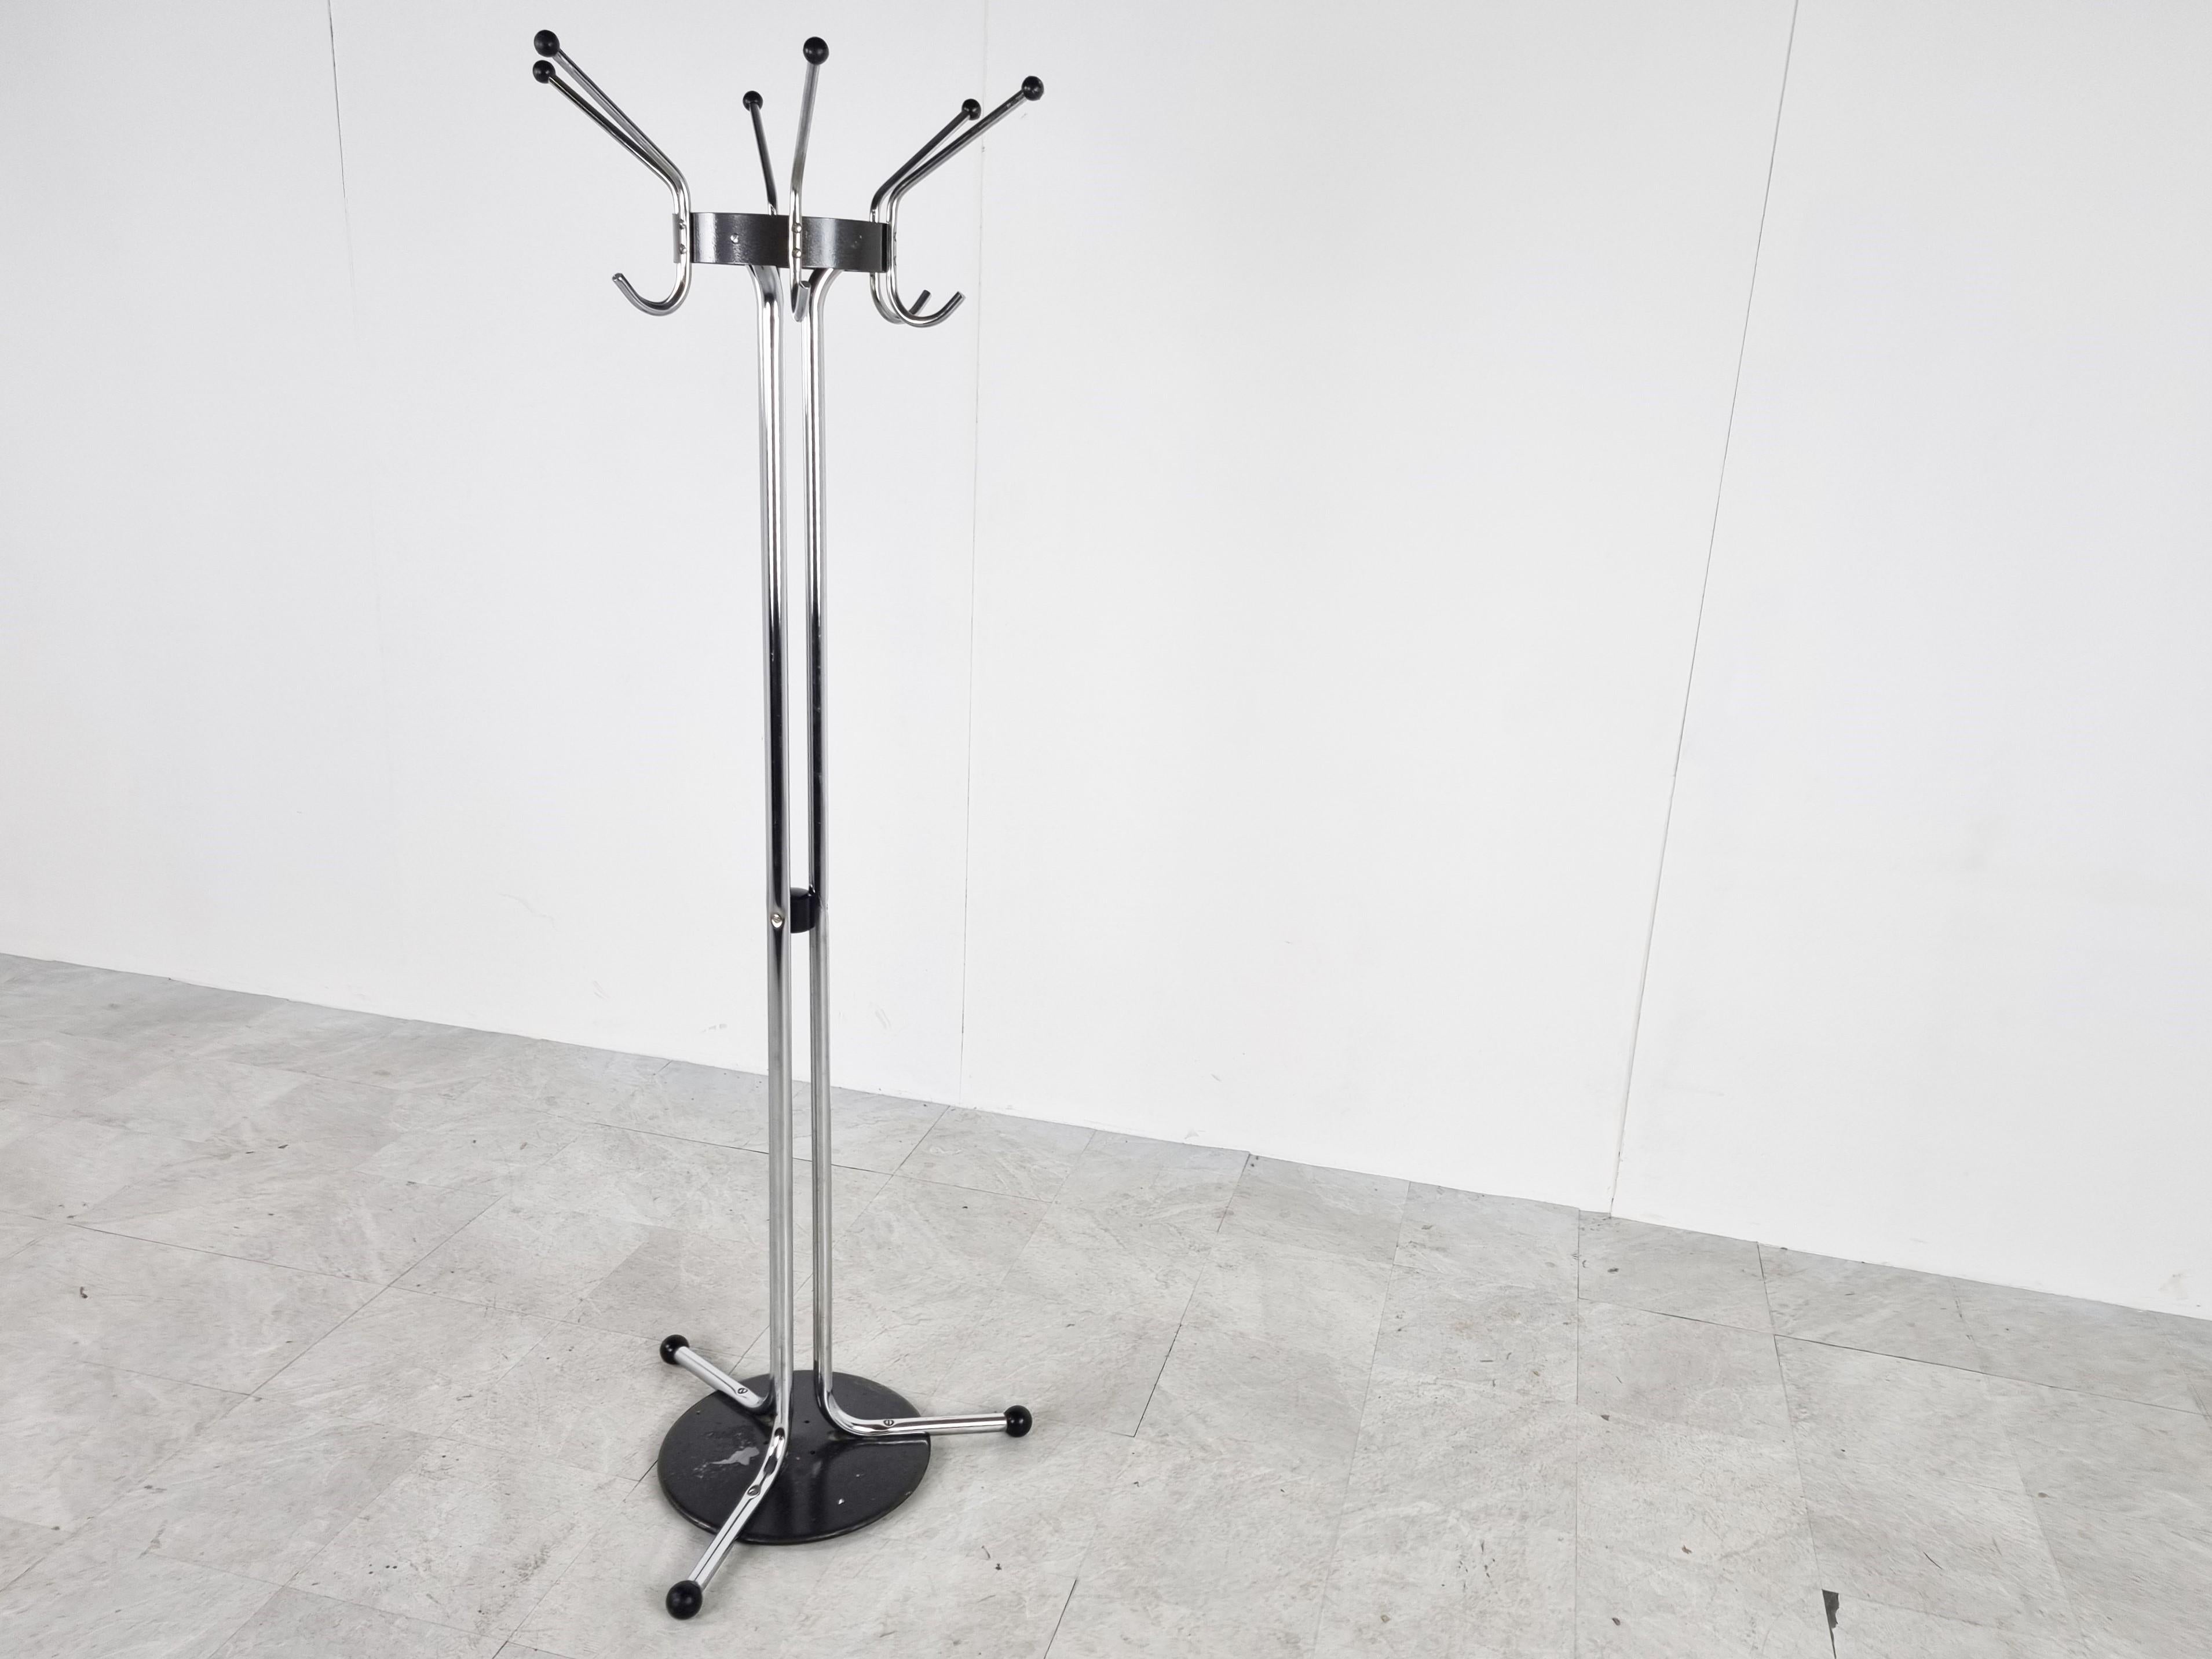 Vintage Chrome Coat Stands by Willy Van Der Meeren for Tubax, 1970s For Sale 1